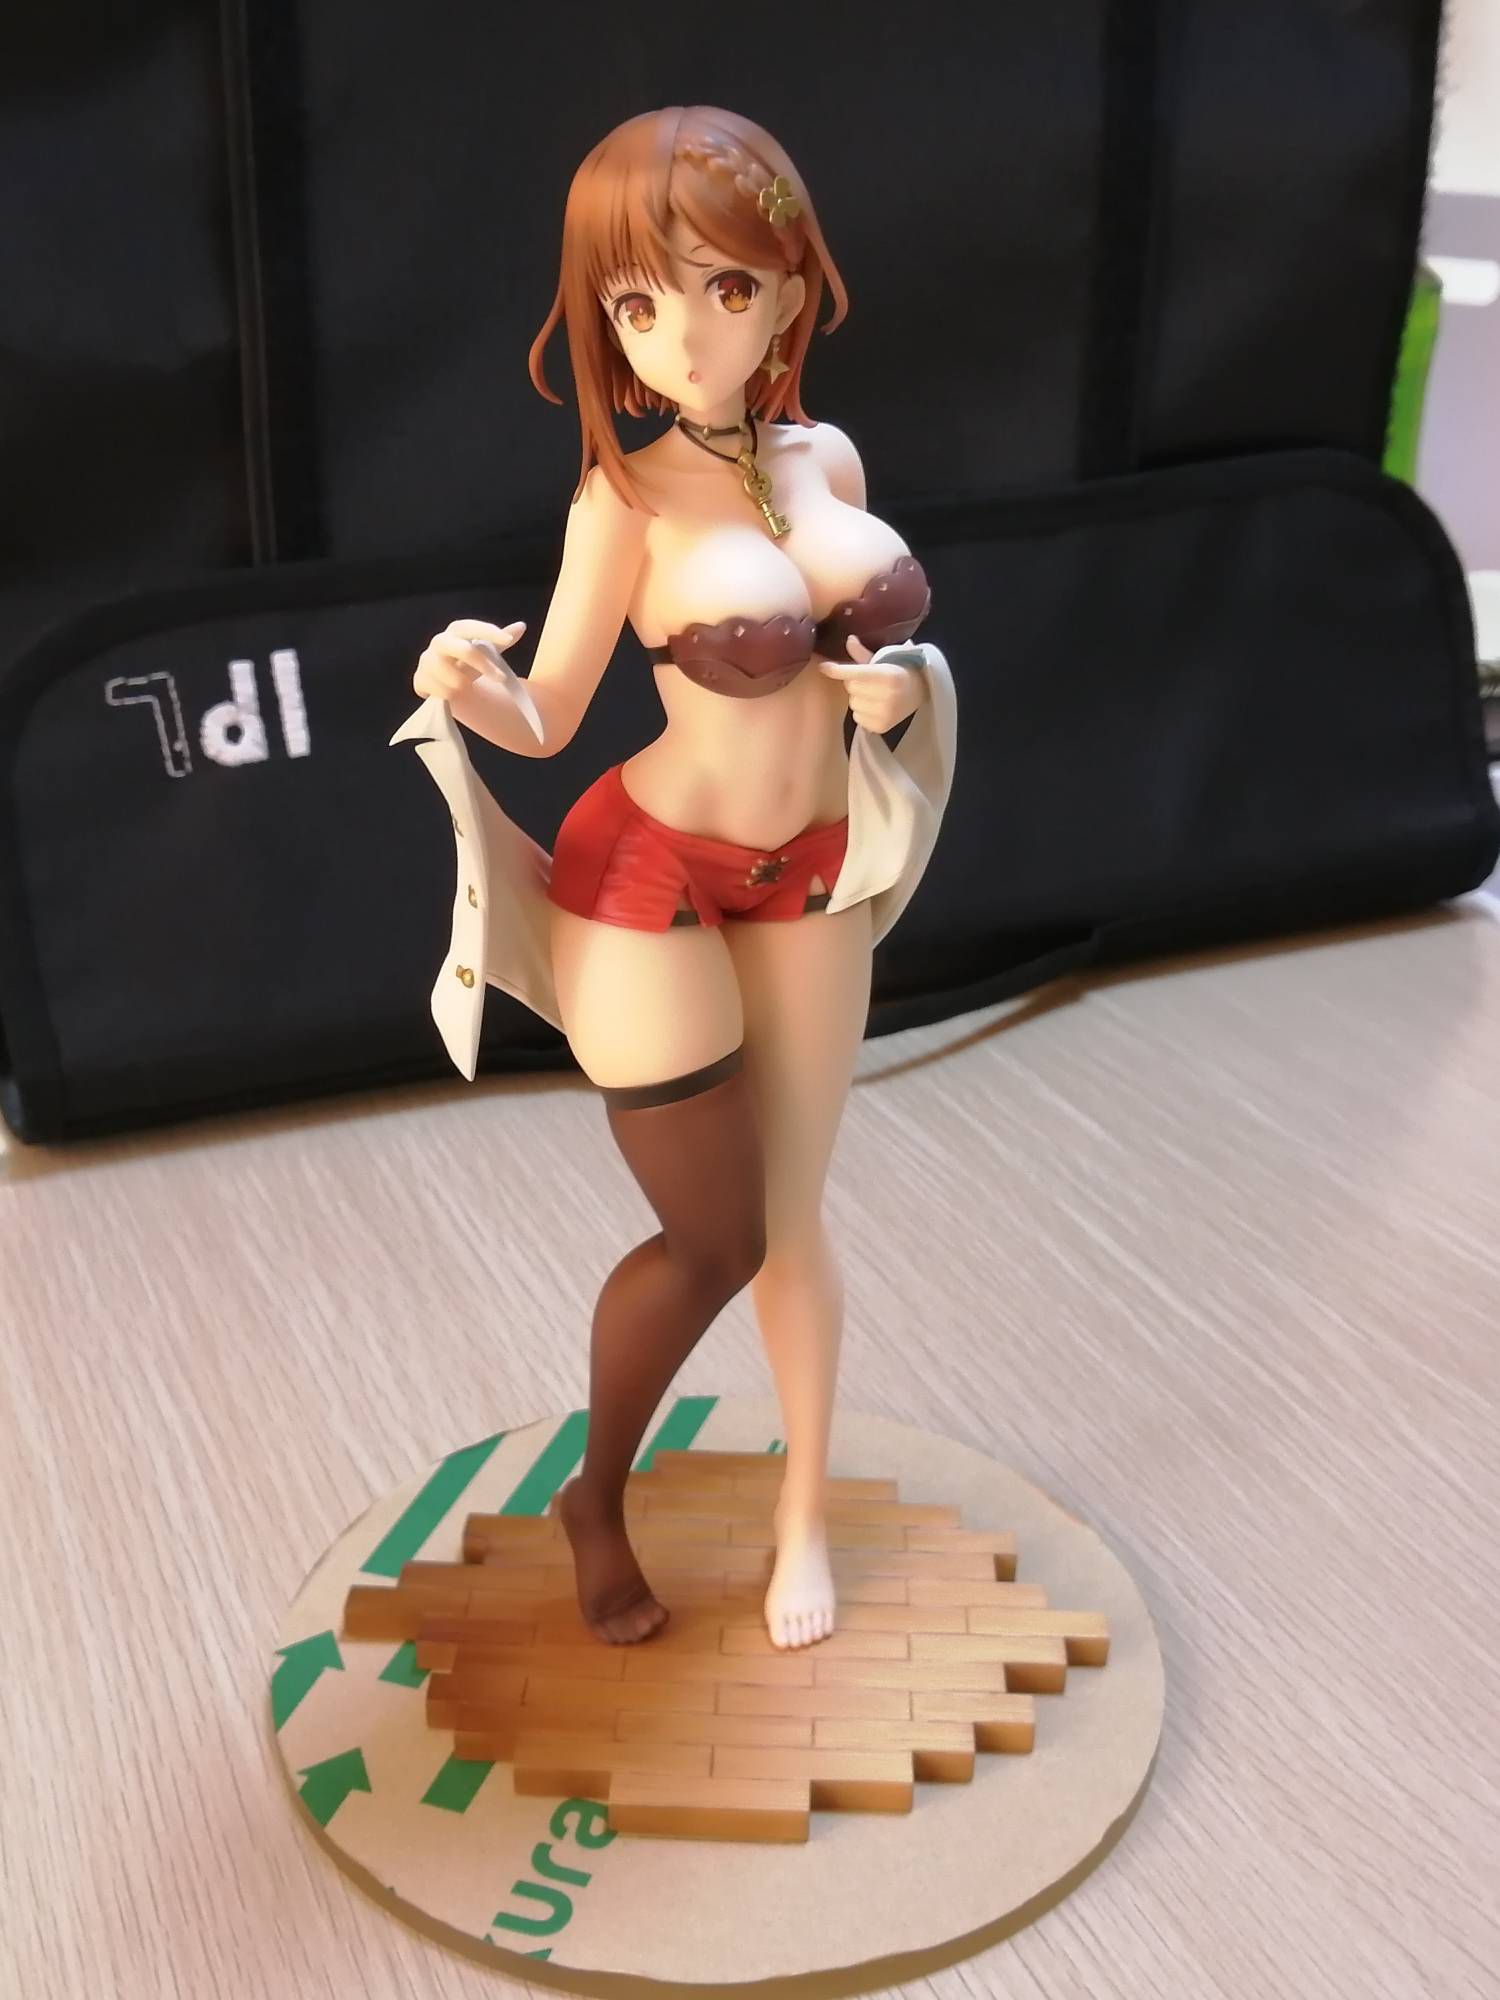 【Image】New figure wwwwwwww too etch called "Change of clothes riser" 1